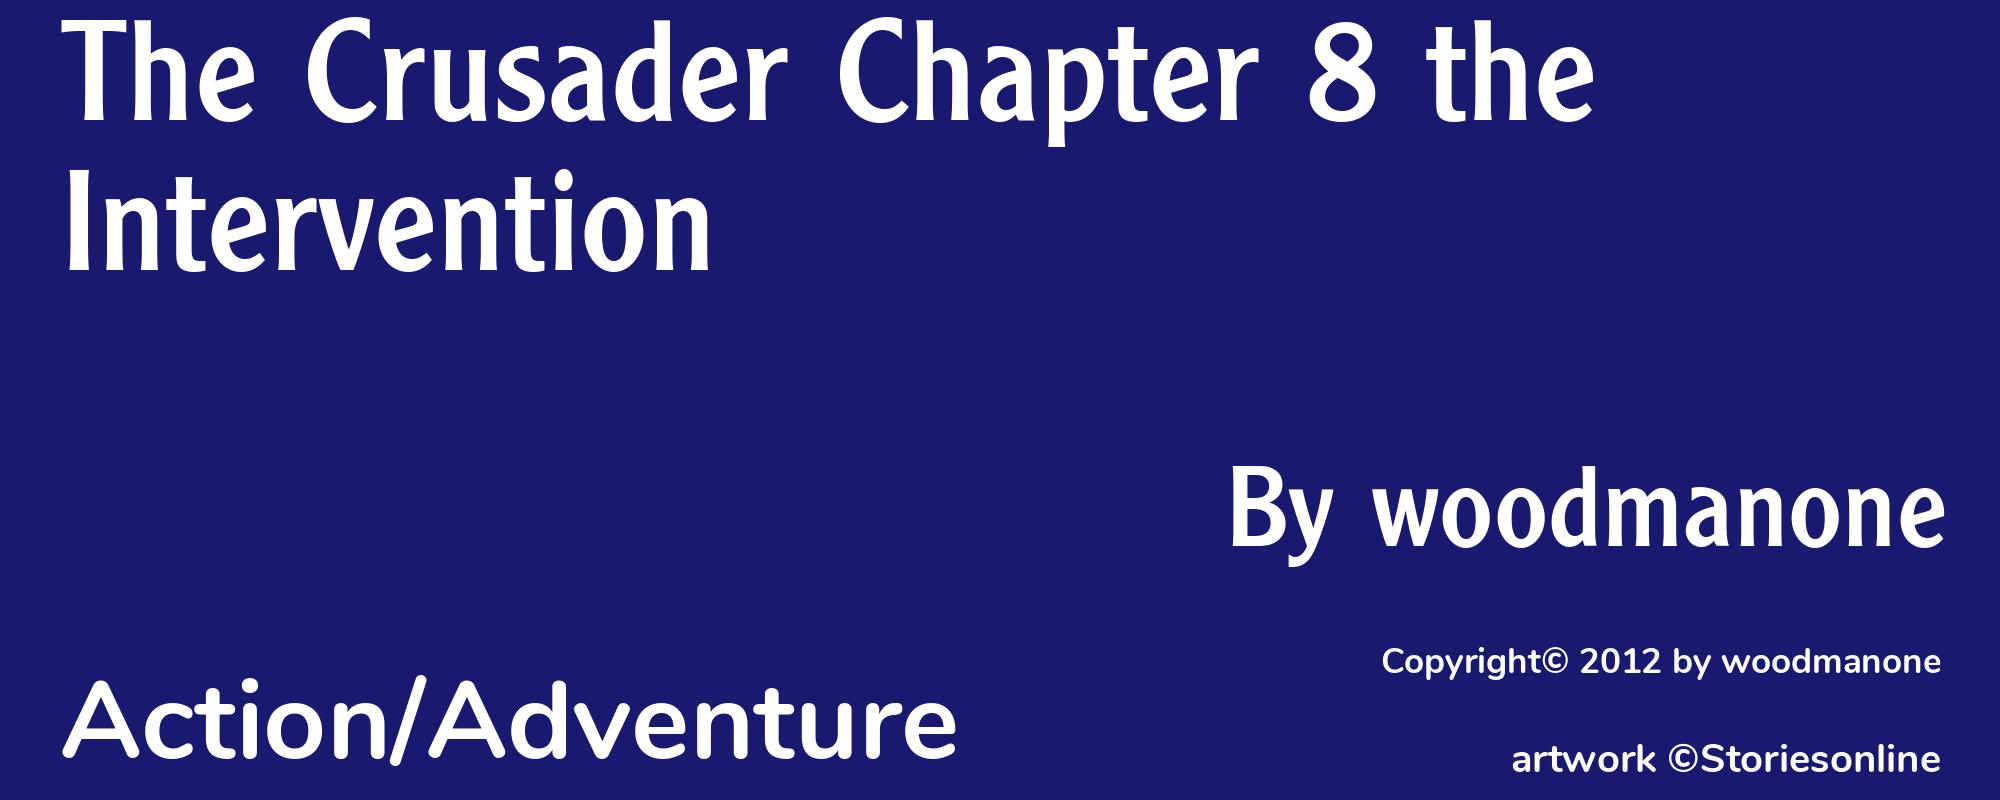 The Crusader Chapter 8 the Intervention - Cover